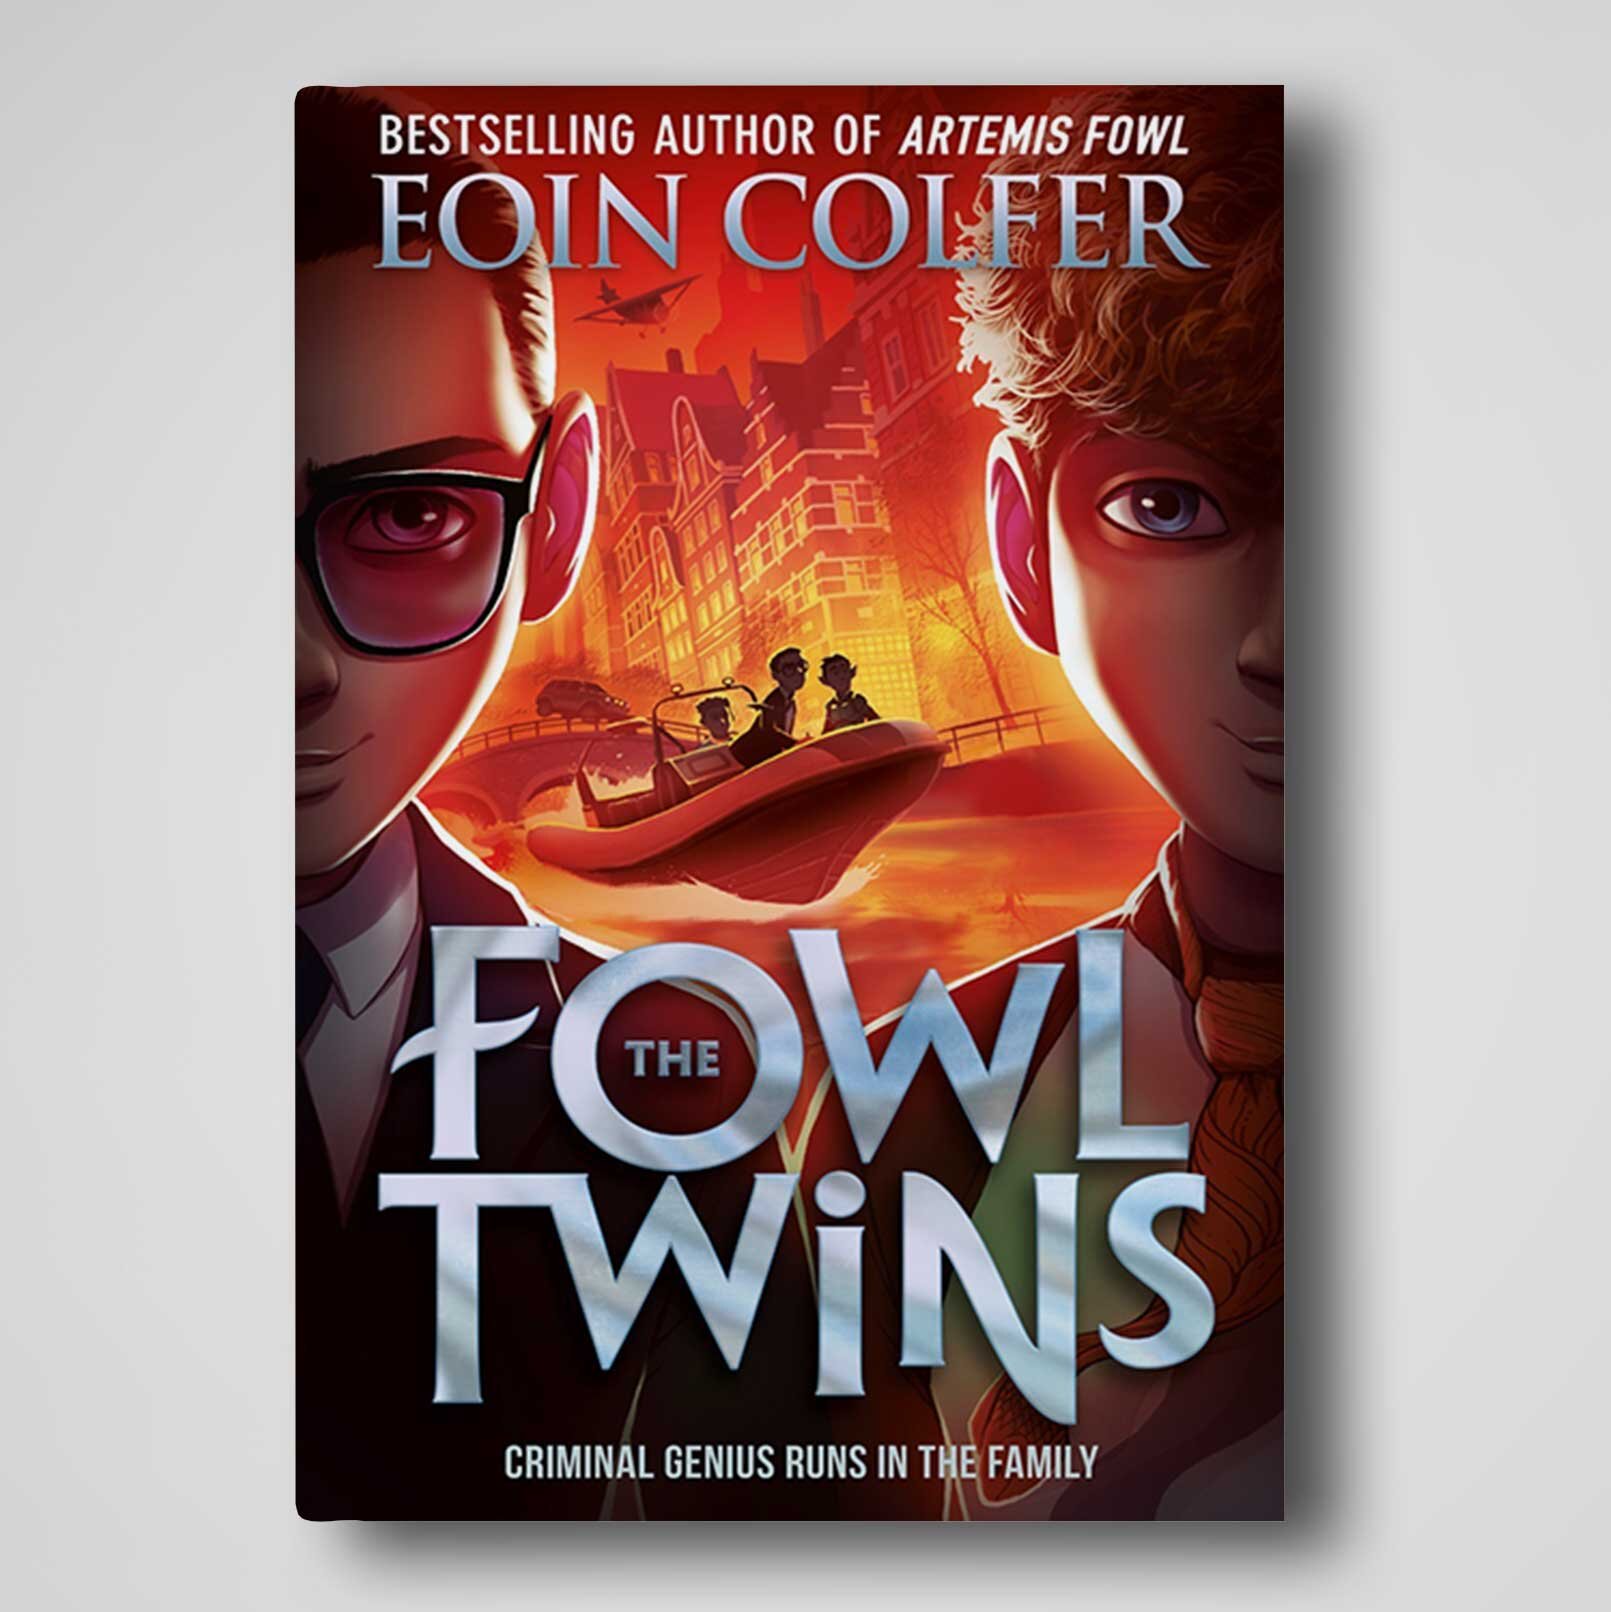 The Fowl Twins Deny All Charges (The Fowl Twins, Book 2) (Artemis Fowl) -  GOOD